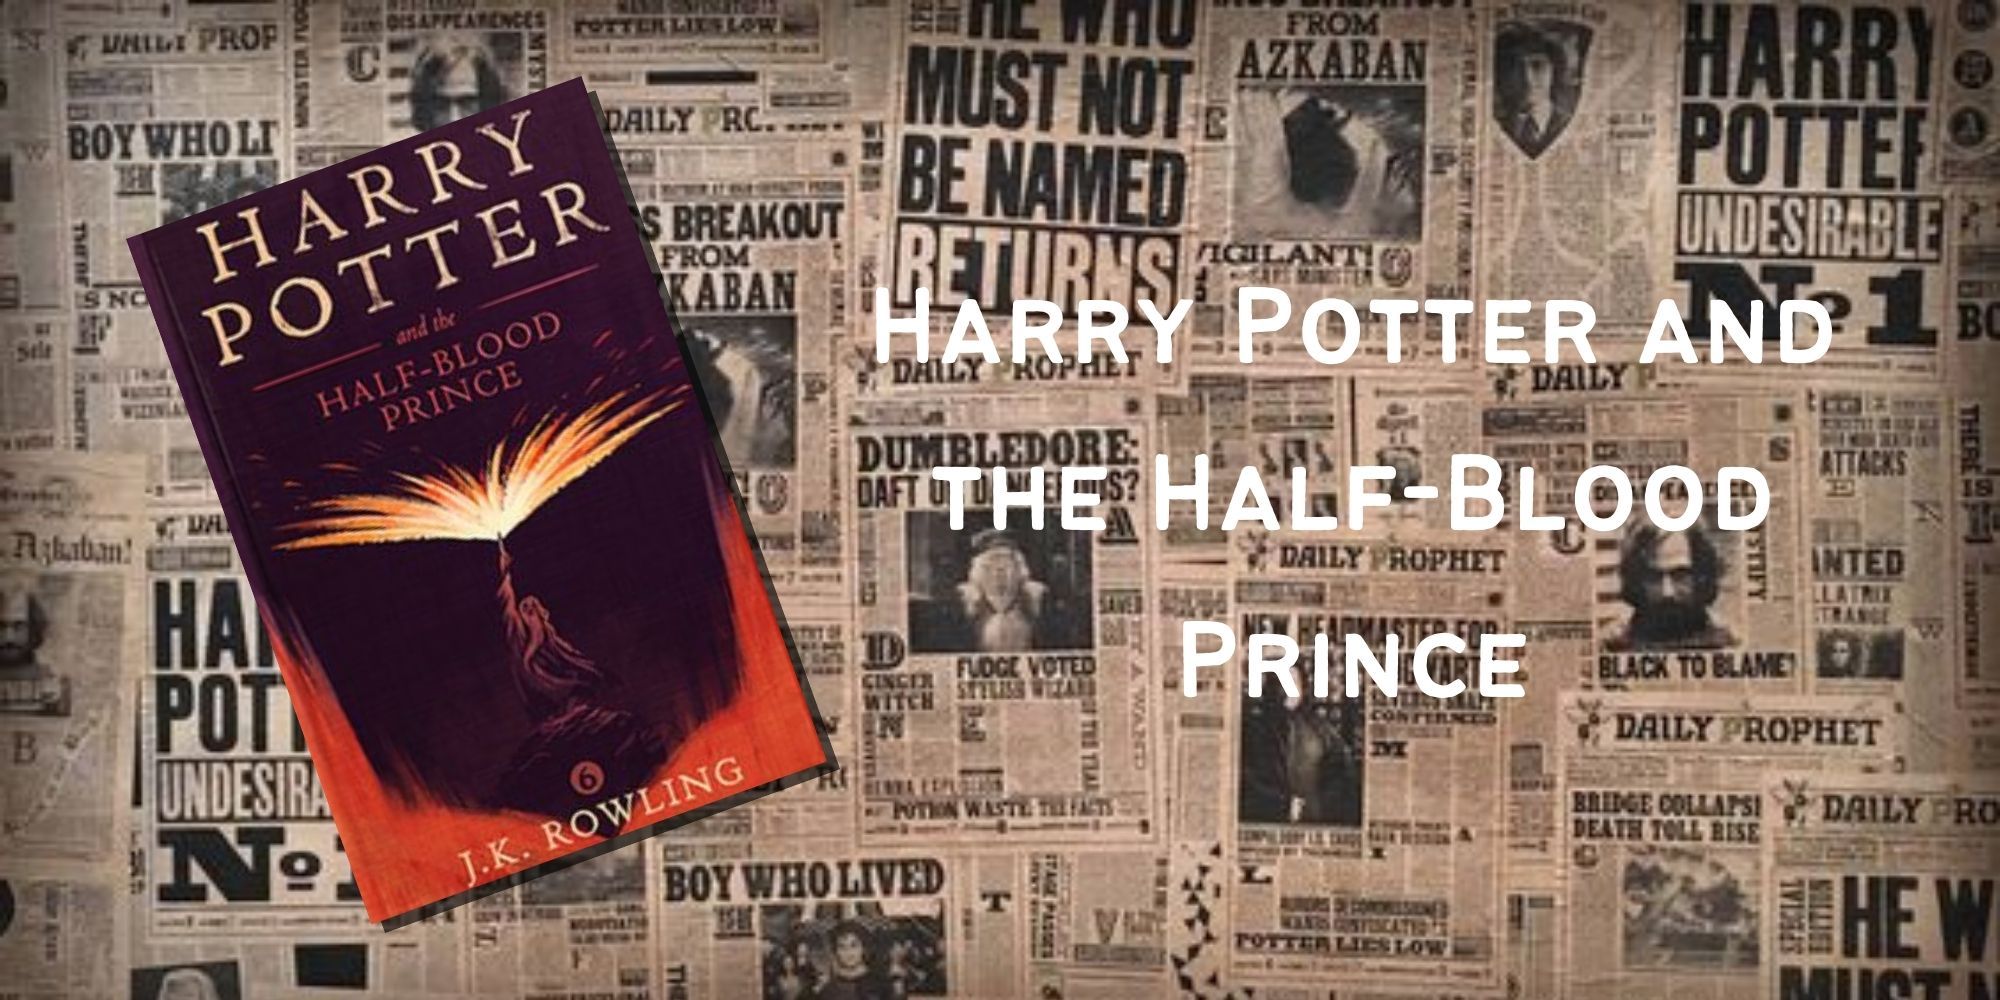 The cover of Harry Potter and the Half-Blood Prince